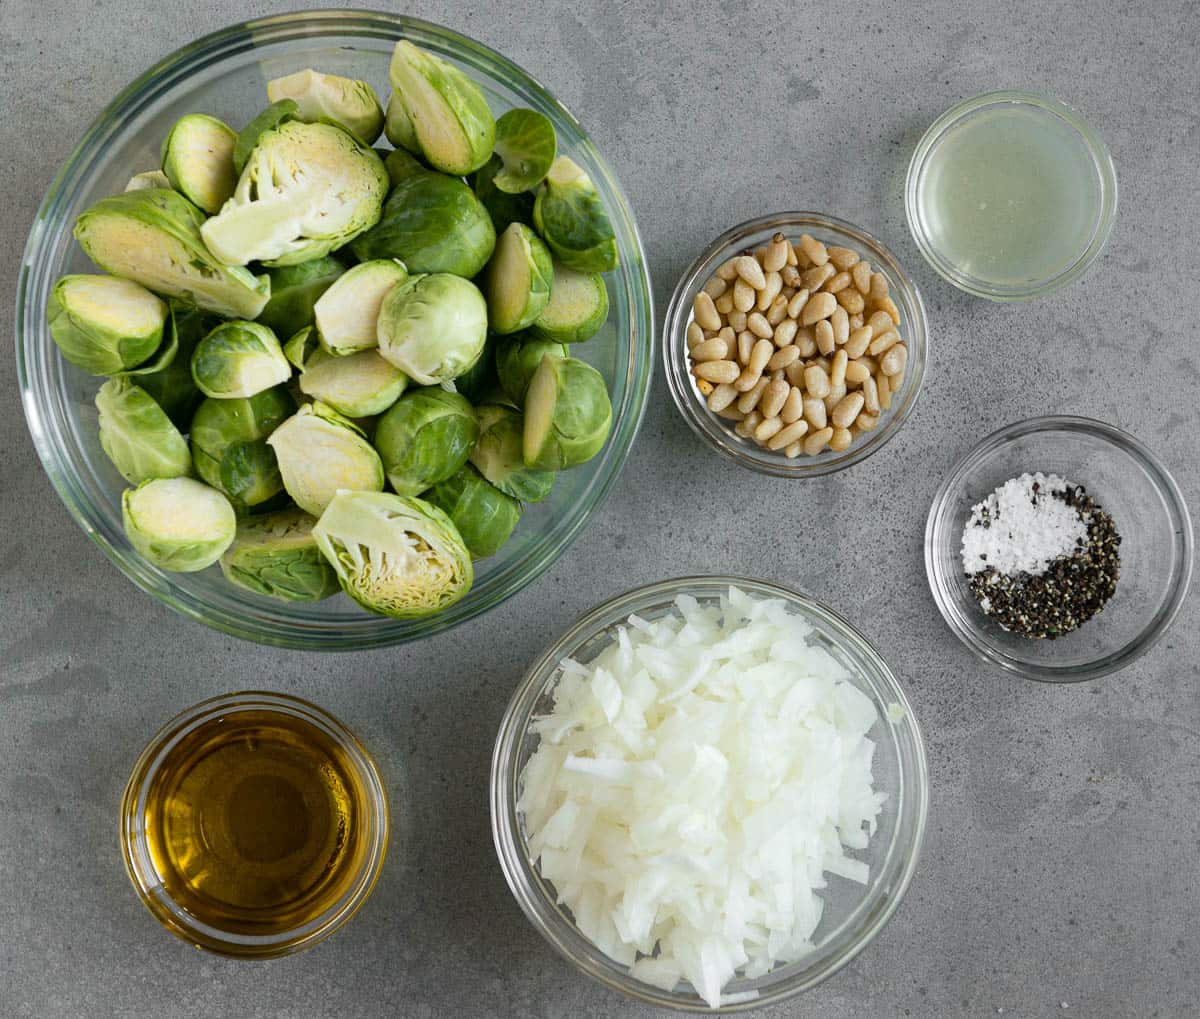 ingredients to make Sautéed Brussels Sprouts